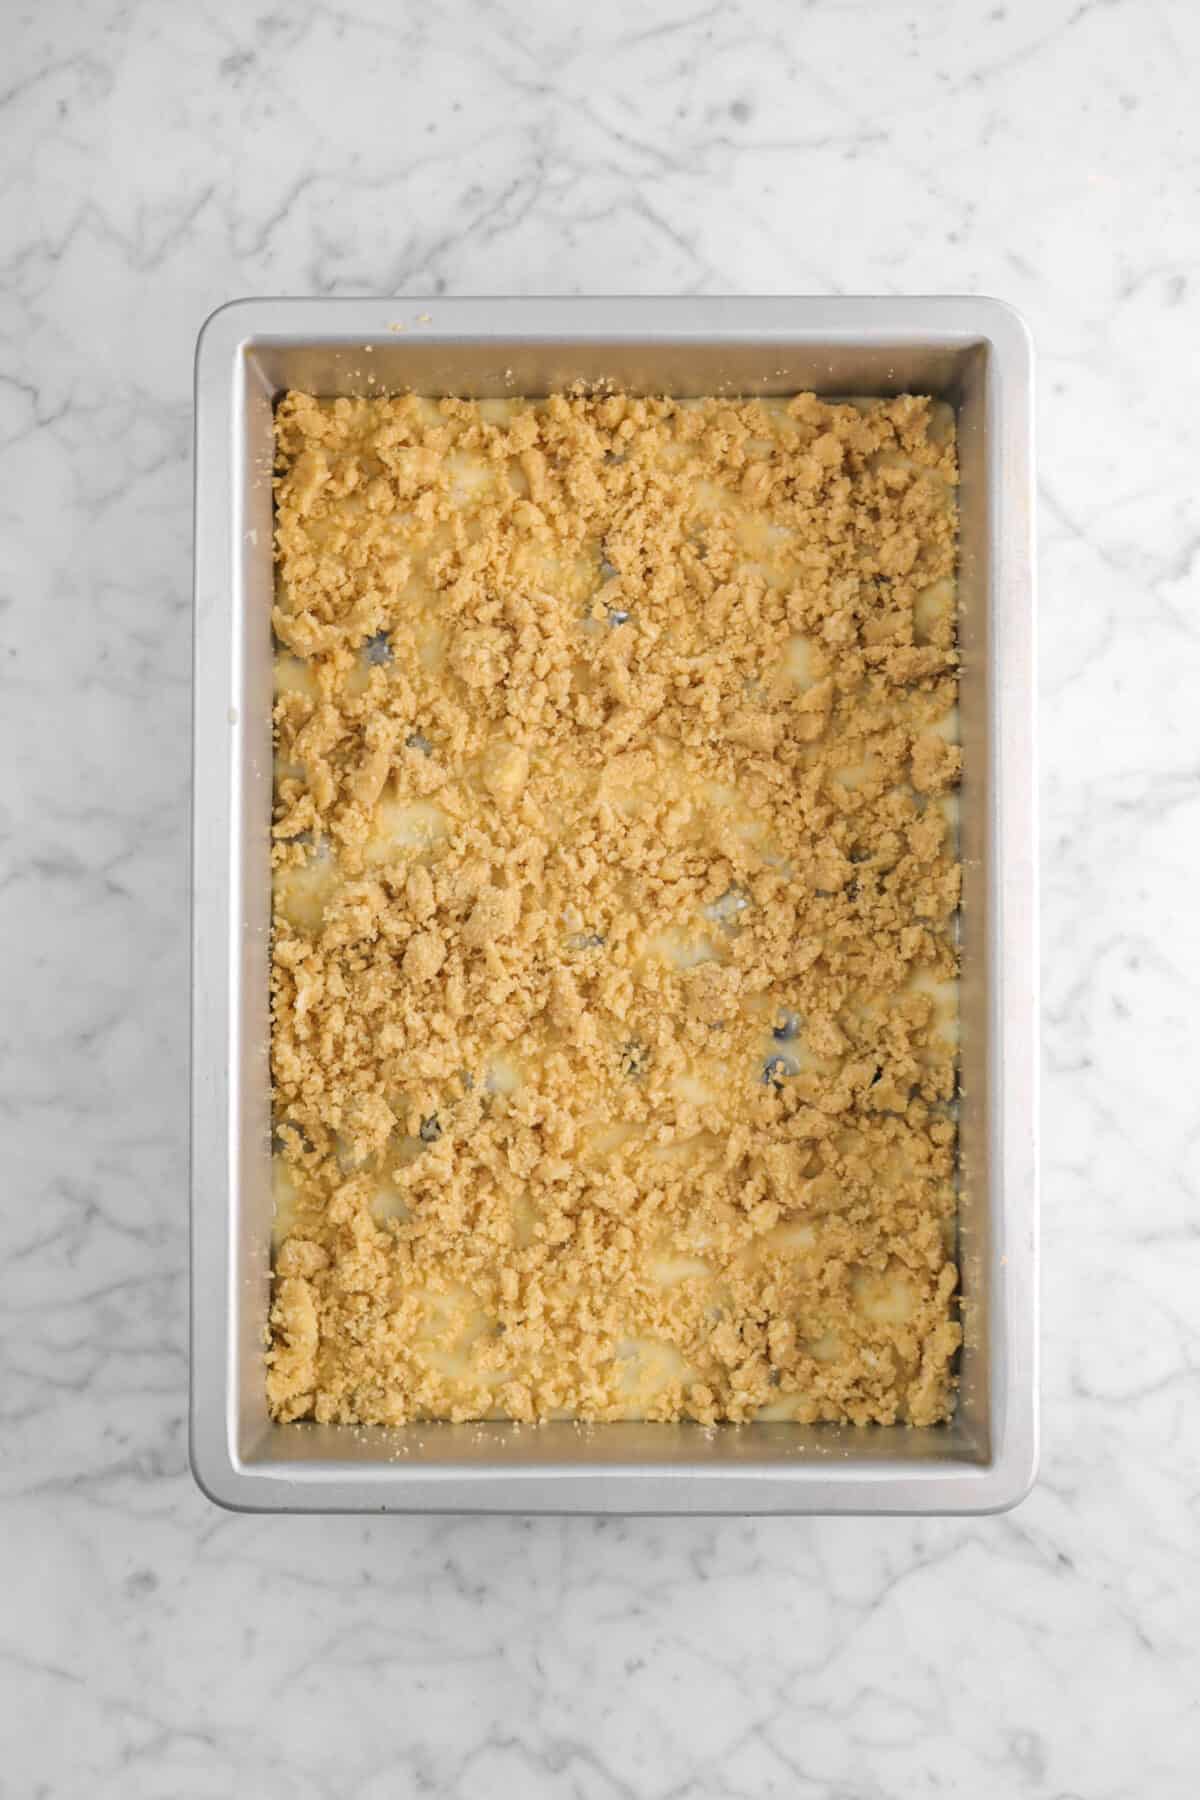 crumble added on top of cake batter in pan